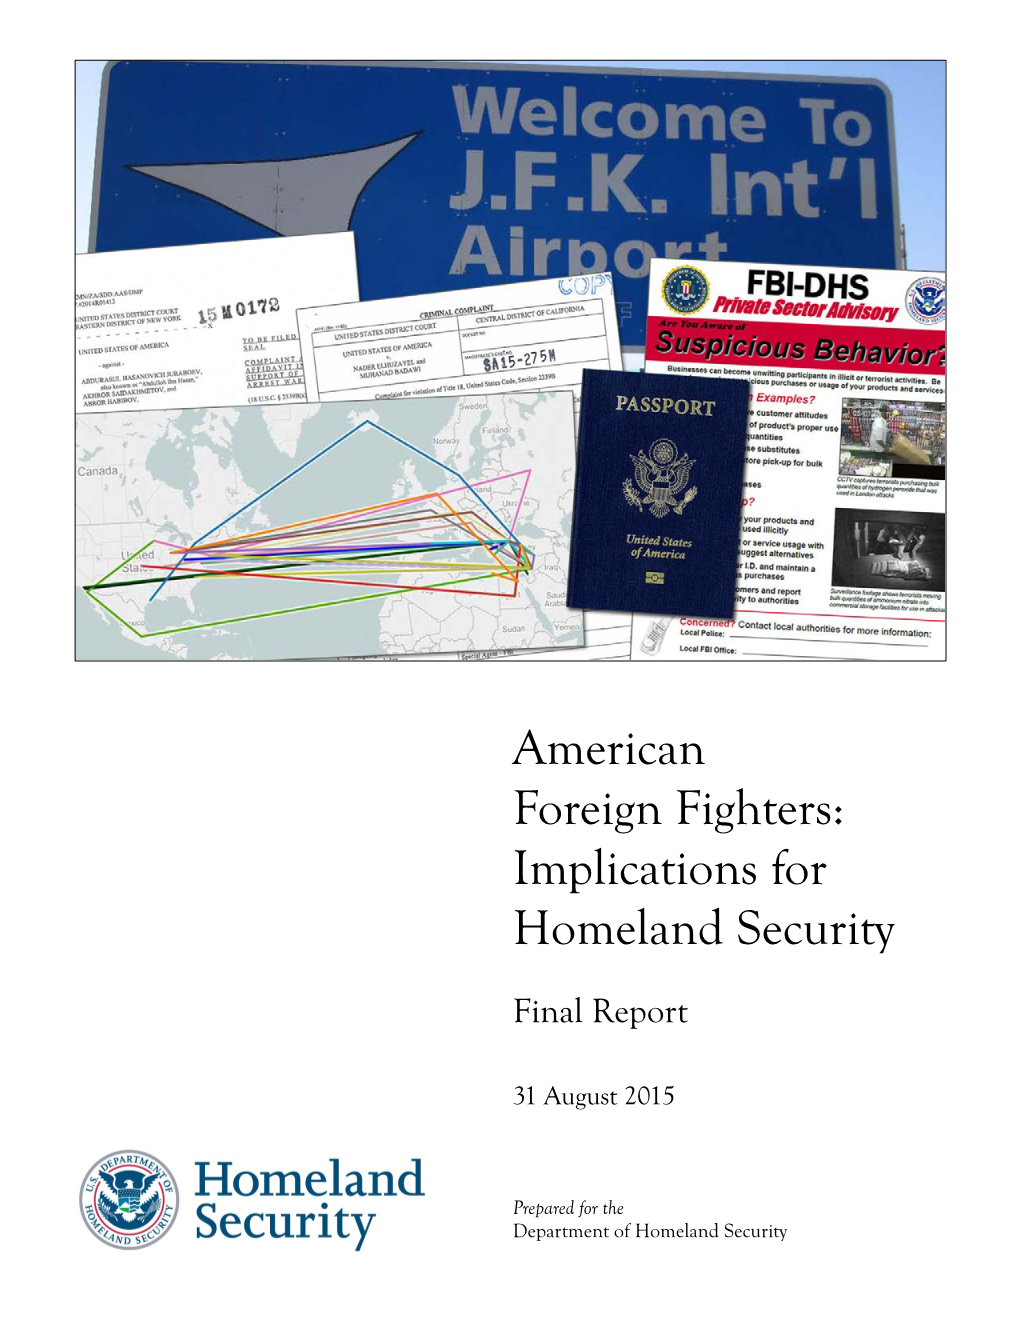 American Foreign Fighters: Implications for Homeland Security